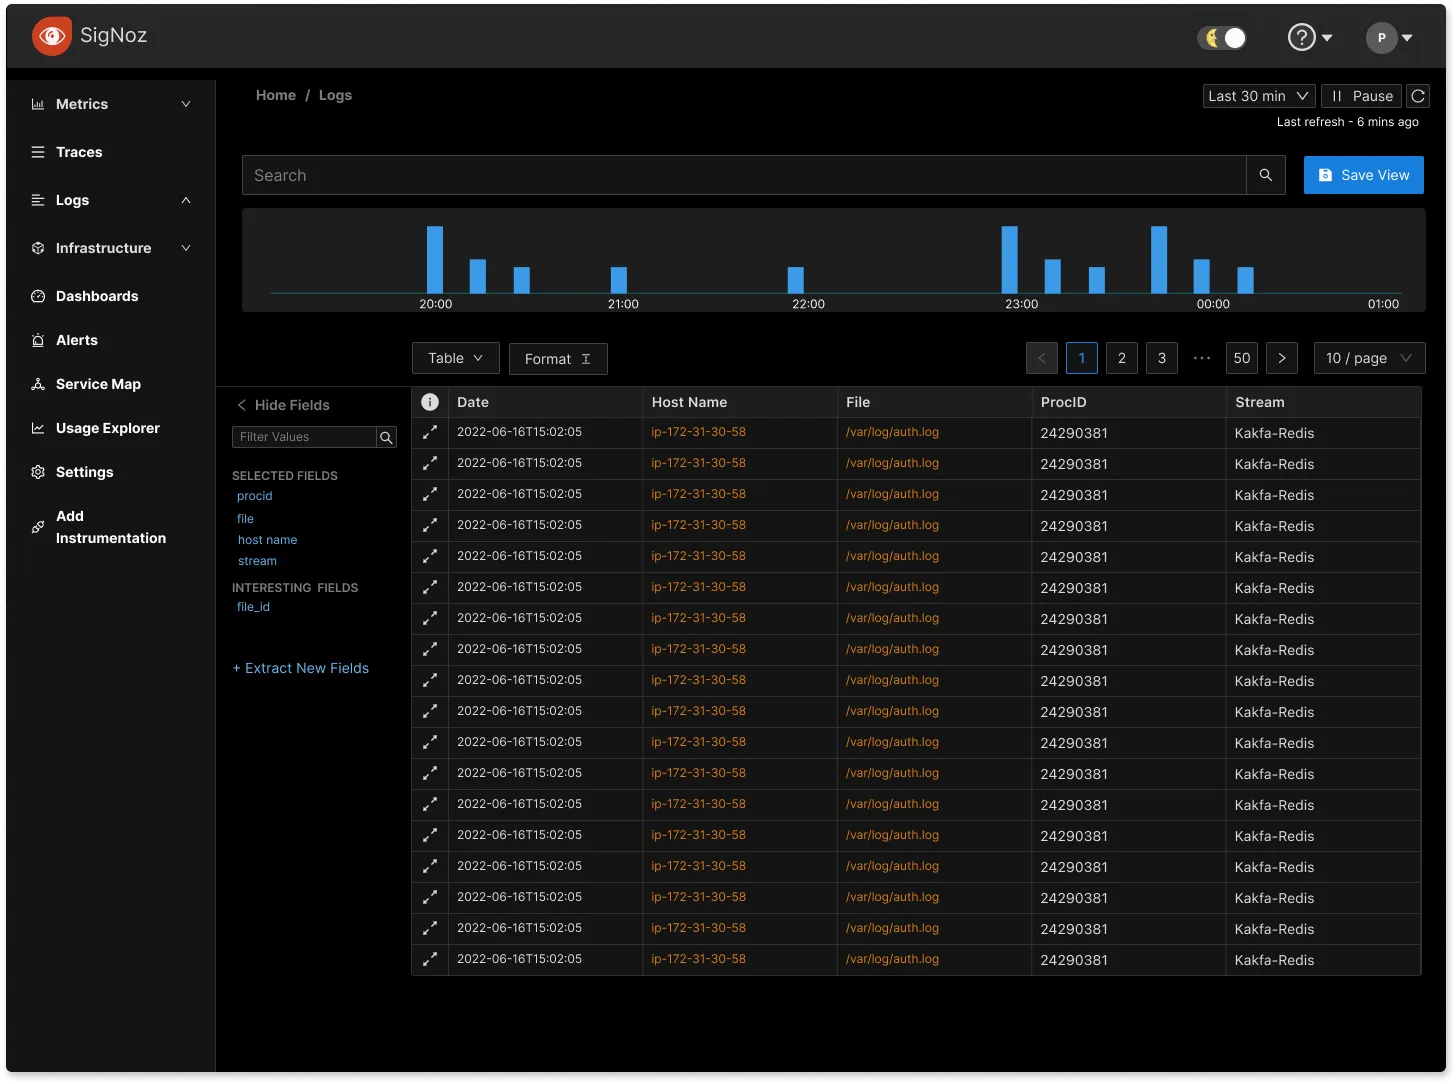 A sneak peek into on of the compact views we are thinking of having in SigNoz logs management tab